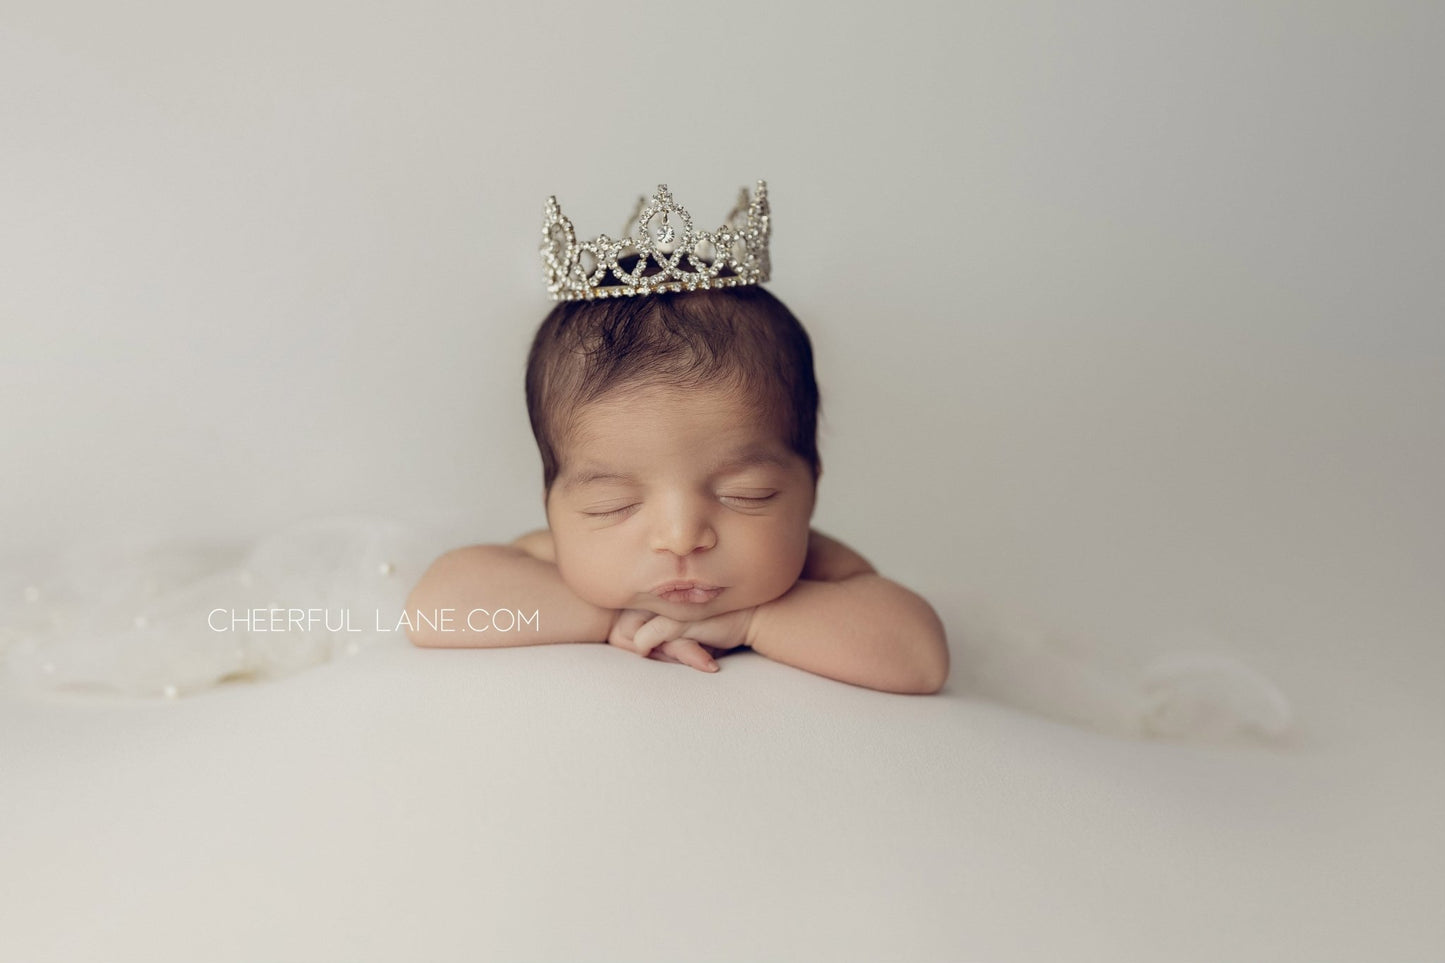 Load image into Gallery viewer, baby girl crown, crown cake topper - Corinne - Cheerful Lane
